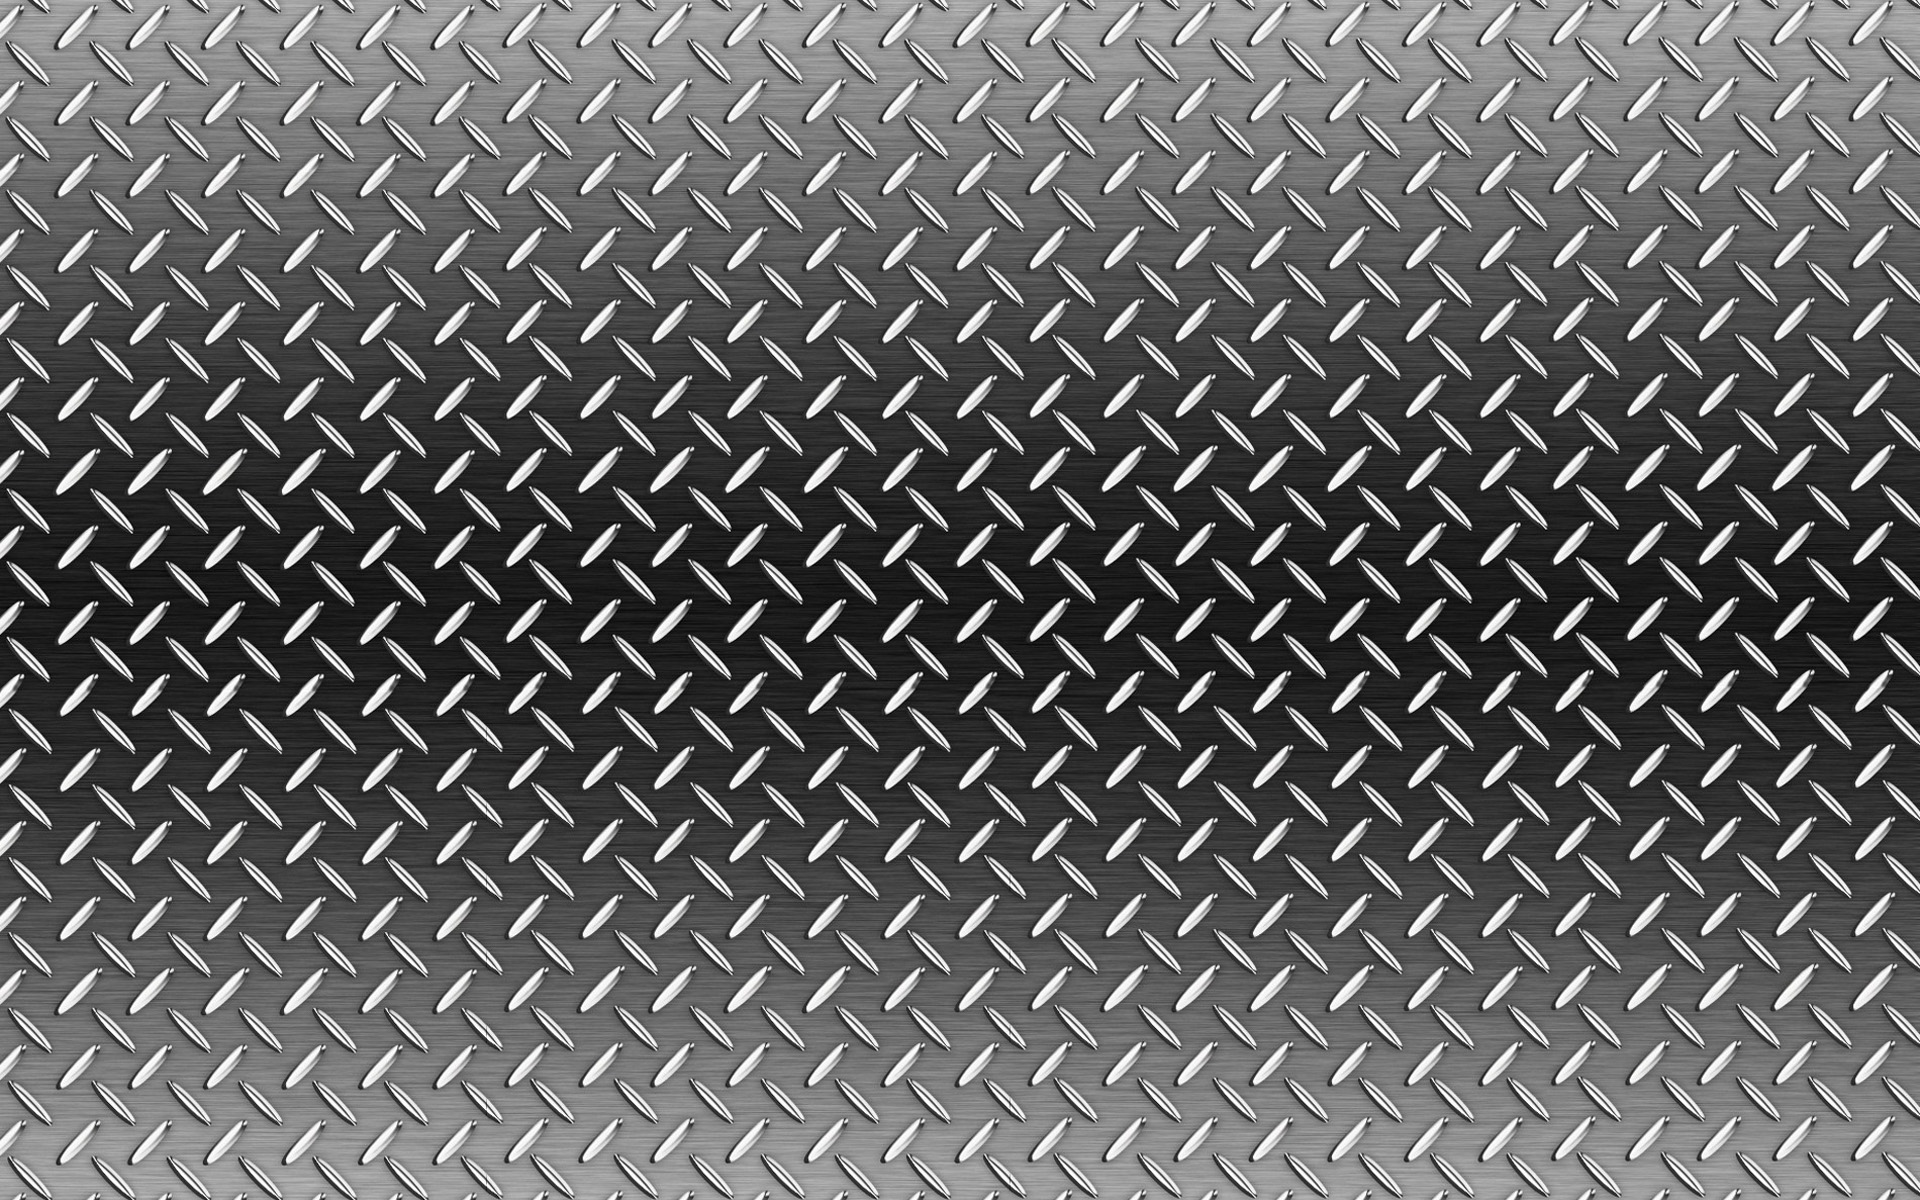 Download wallpaper gray metal plate, macro, metal textures, gray metal background, metal plate, grunge, metal background for desktop with resolution 1920x1200. High Quality HD picture wallpaper